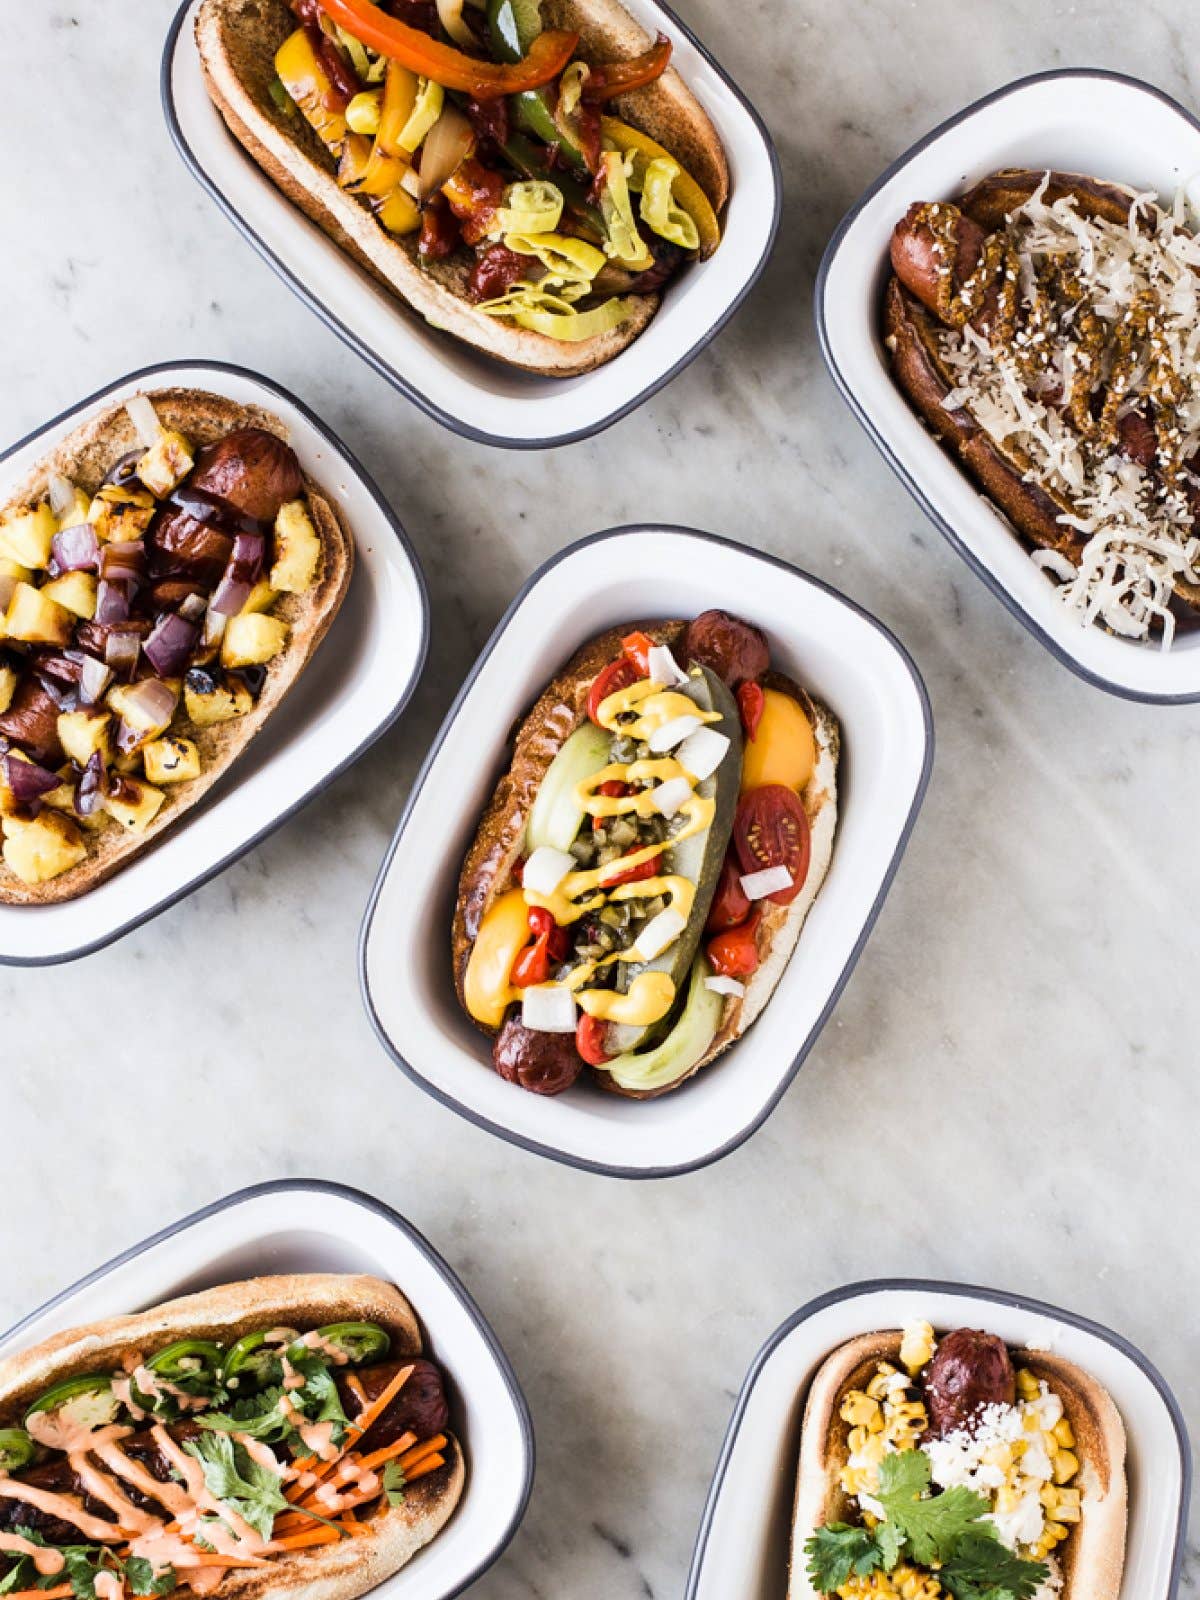 Fun Hot Dog Toppings That Aren’t Ketchup and Mustard